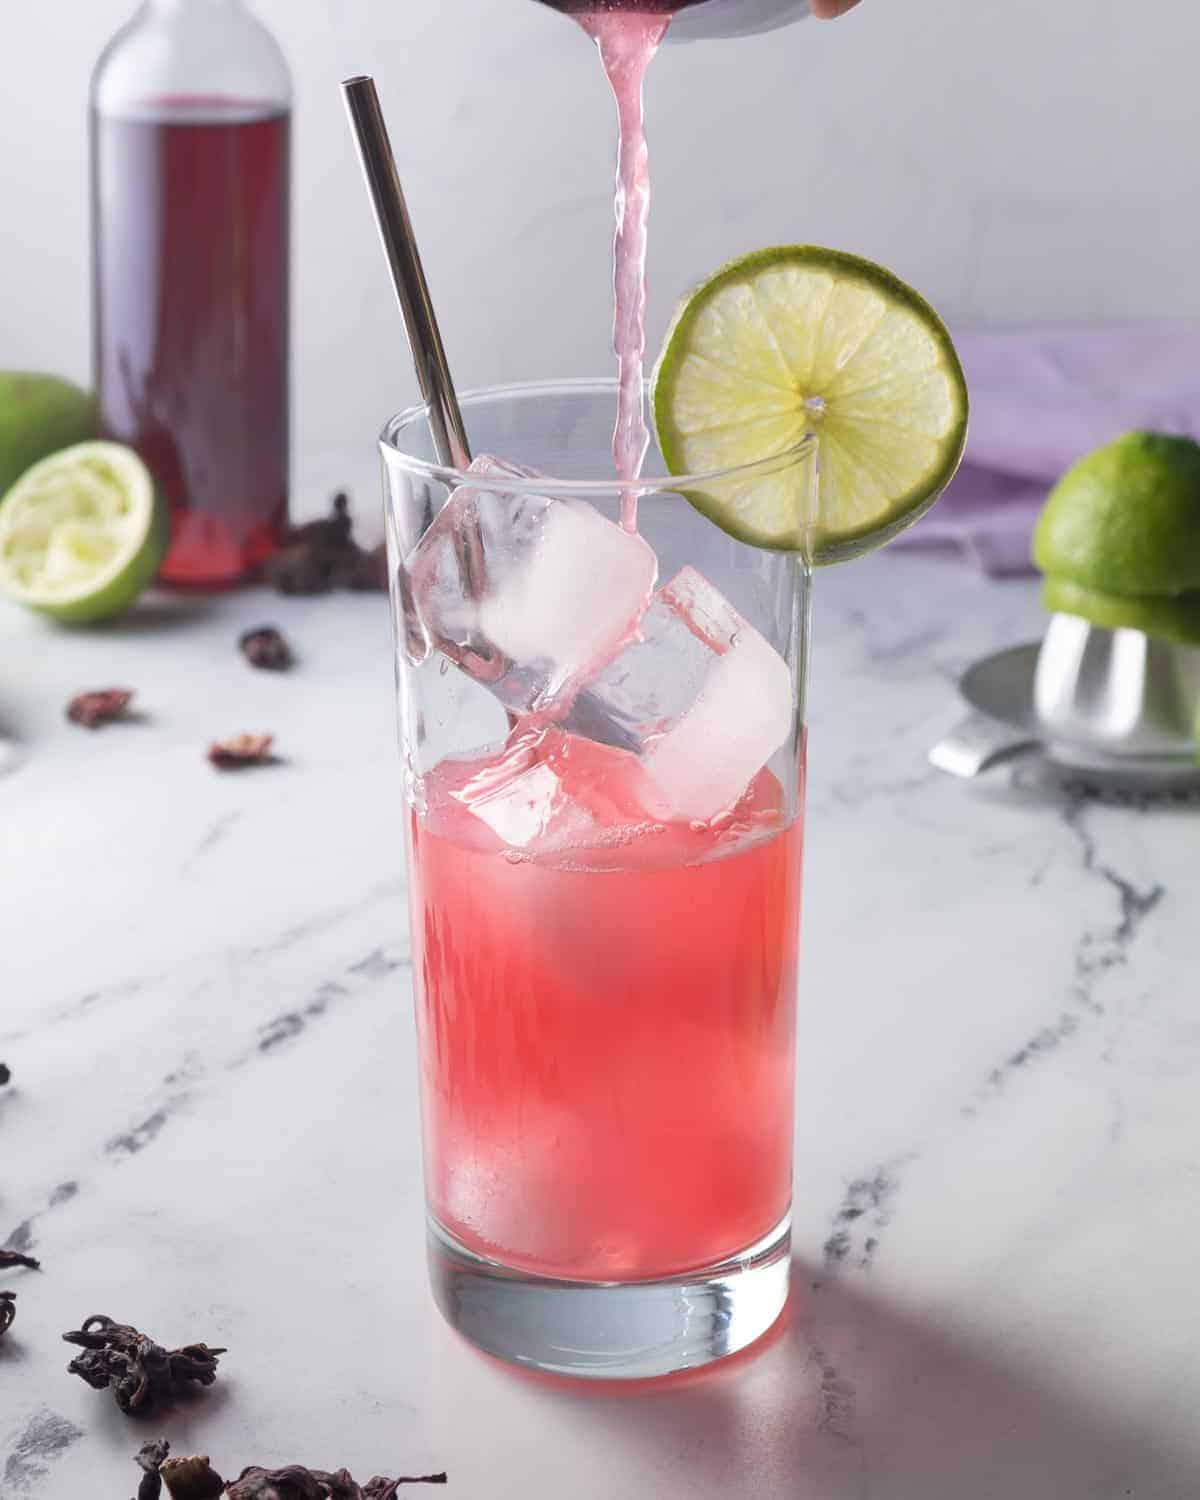 Hibiscus limeade being poured over ice cubes in a tall glass